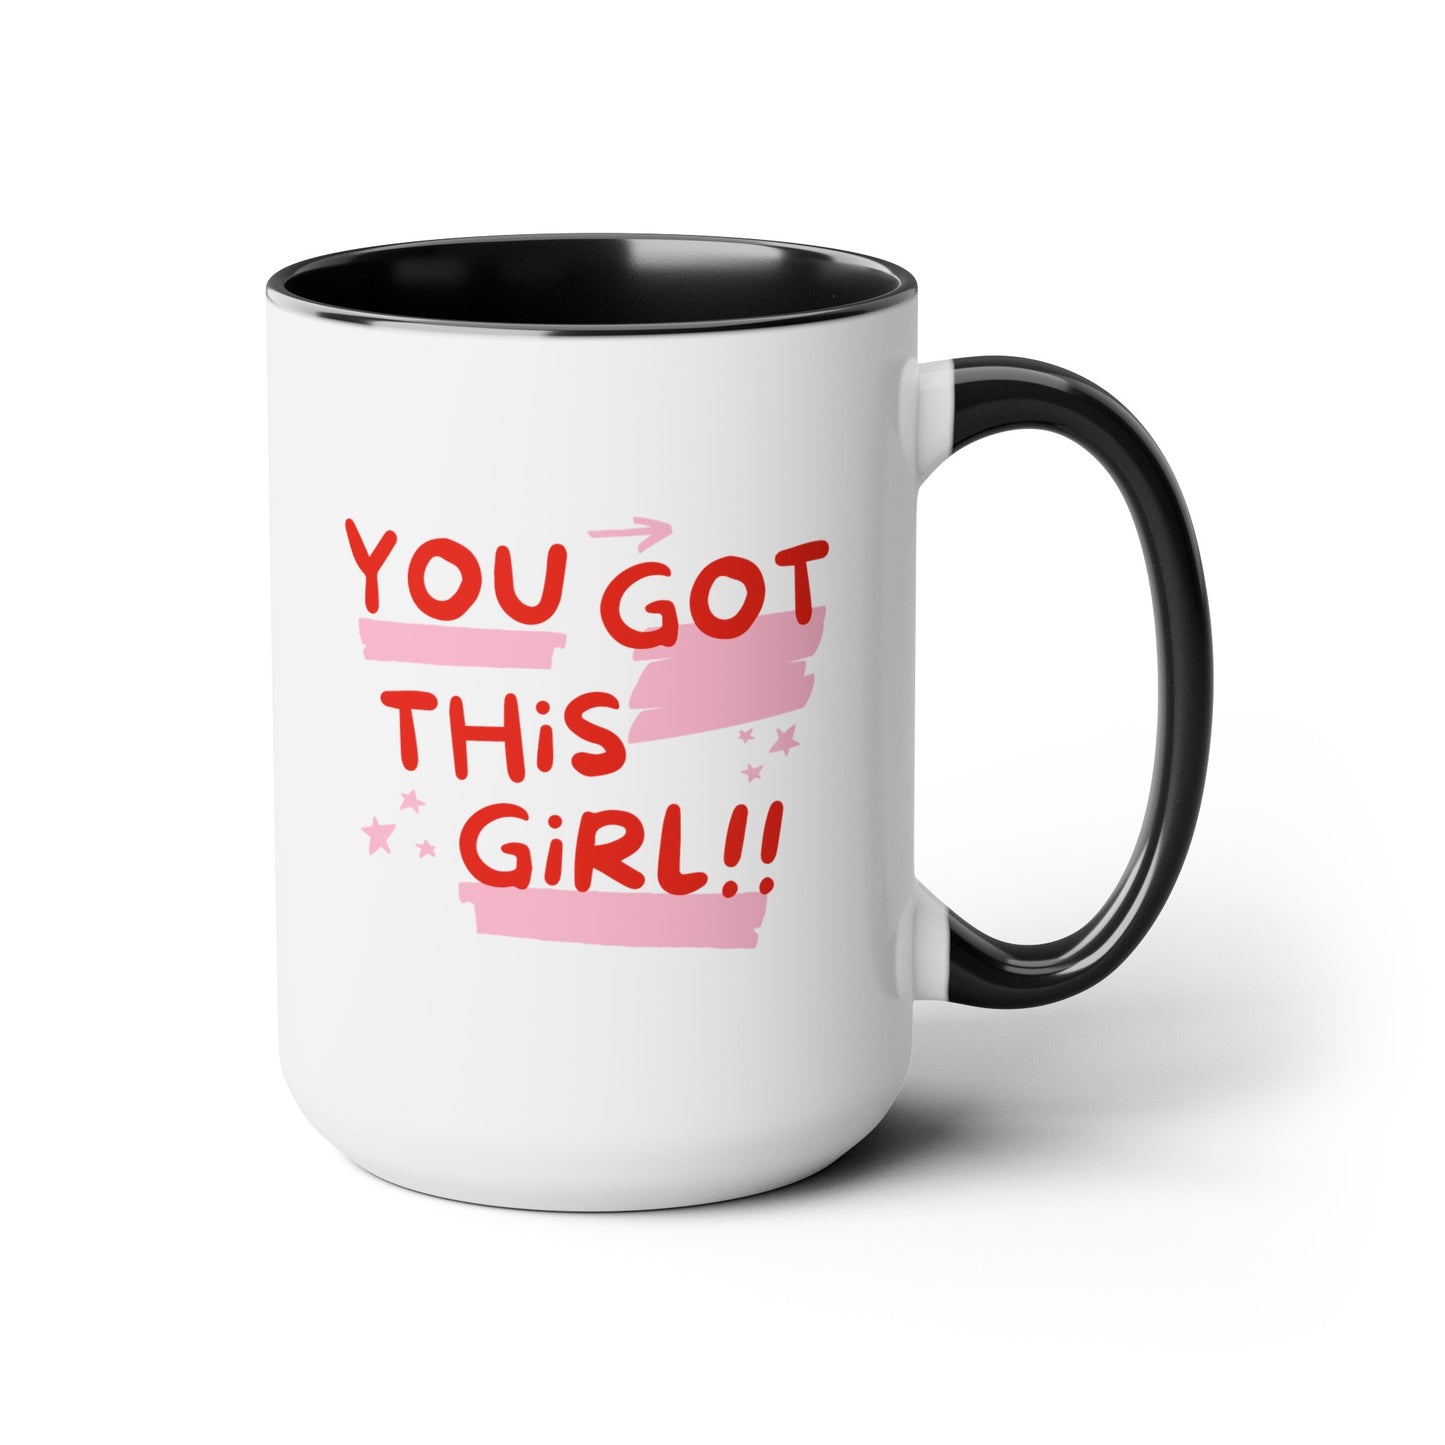 You Got This Girl 15oz white with black accent funny large coffee mug gift for BFF motivational positivity quote congratulations exam results friendship new job waveywares wavey wares wavywares wavy wares